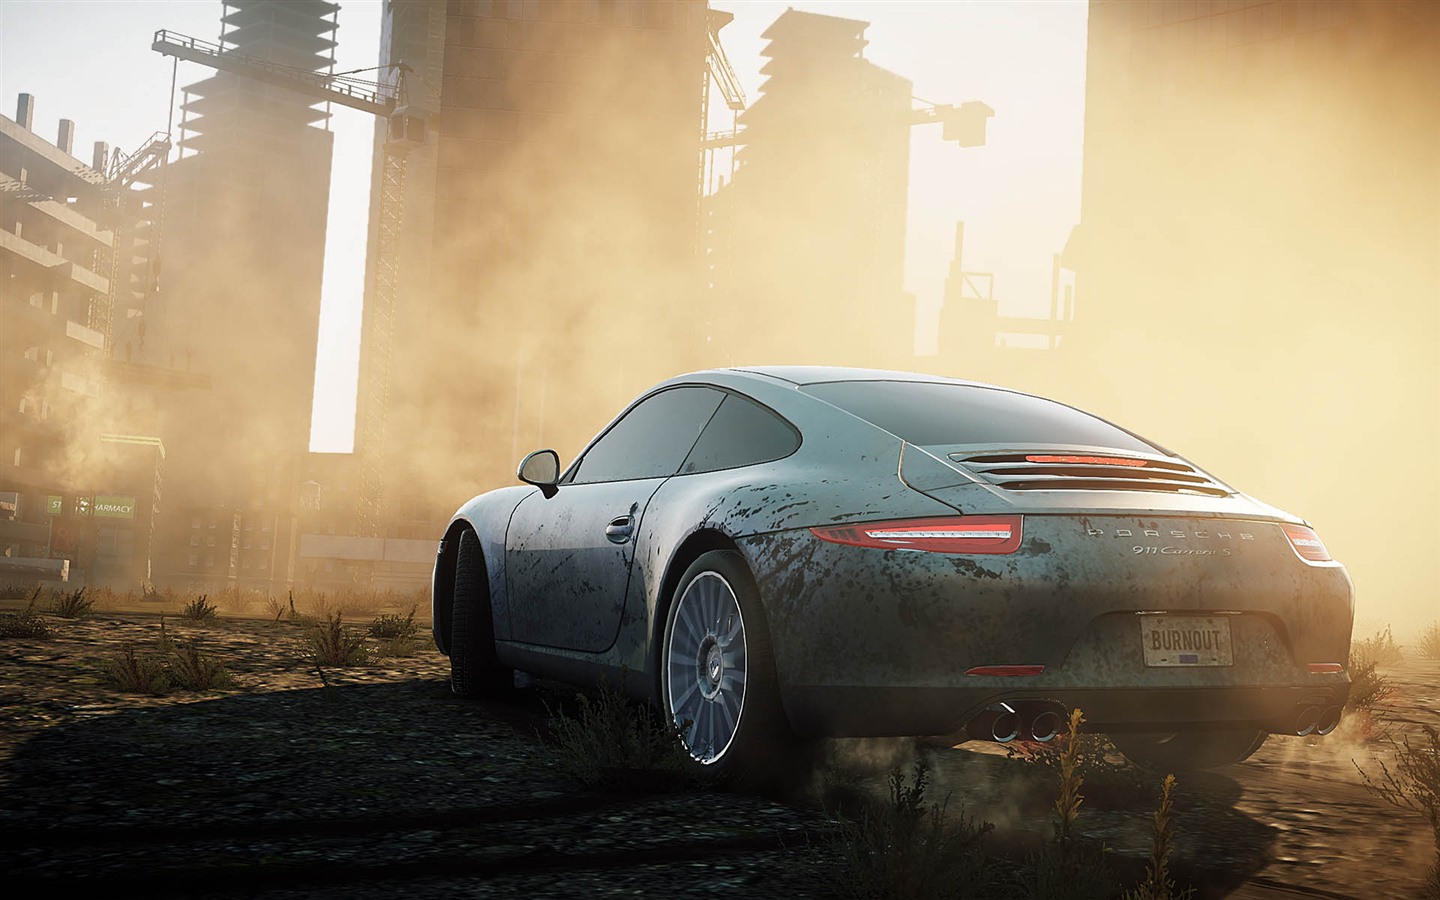 Need for Speed: Most Wanted 极品飞车17：最高通缉 高清壁纸14 - 1440x900